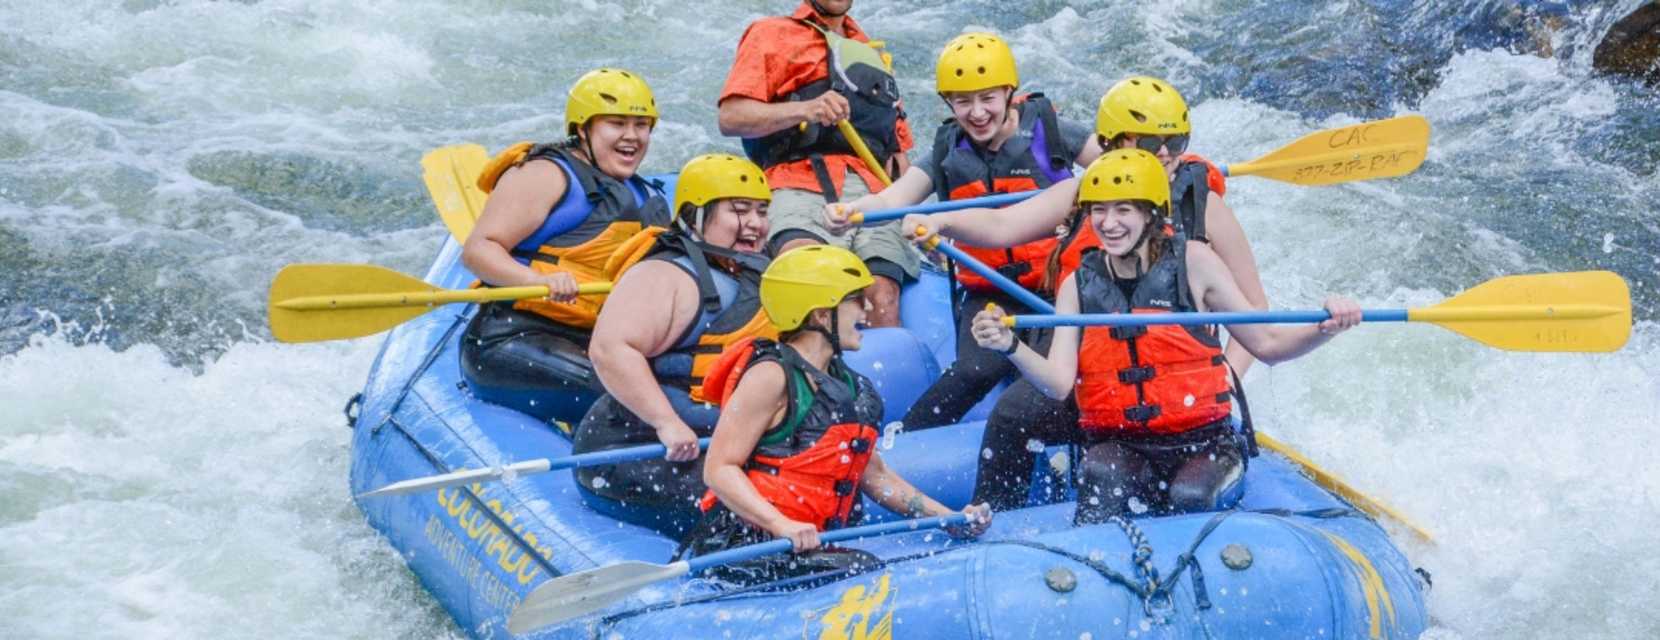 White water rafting with Colorado Adventure Center